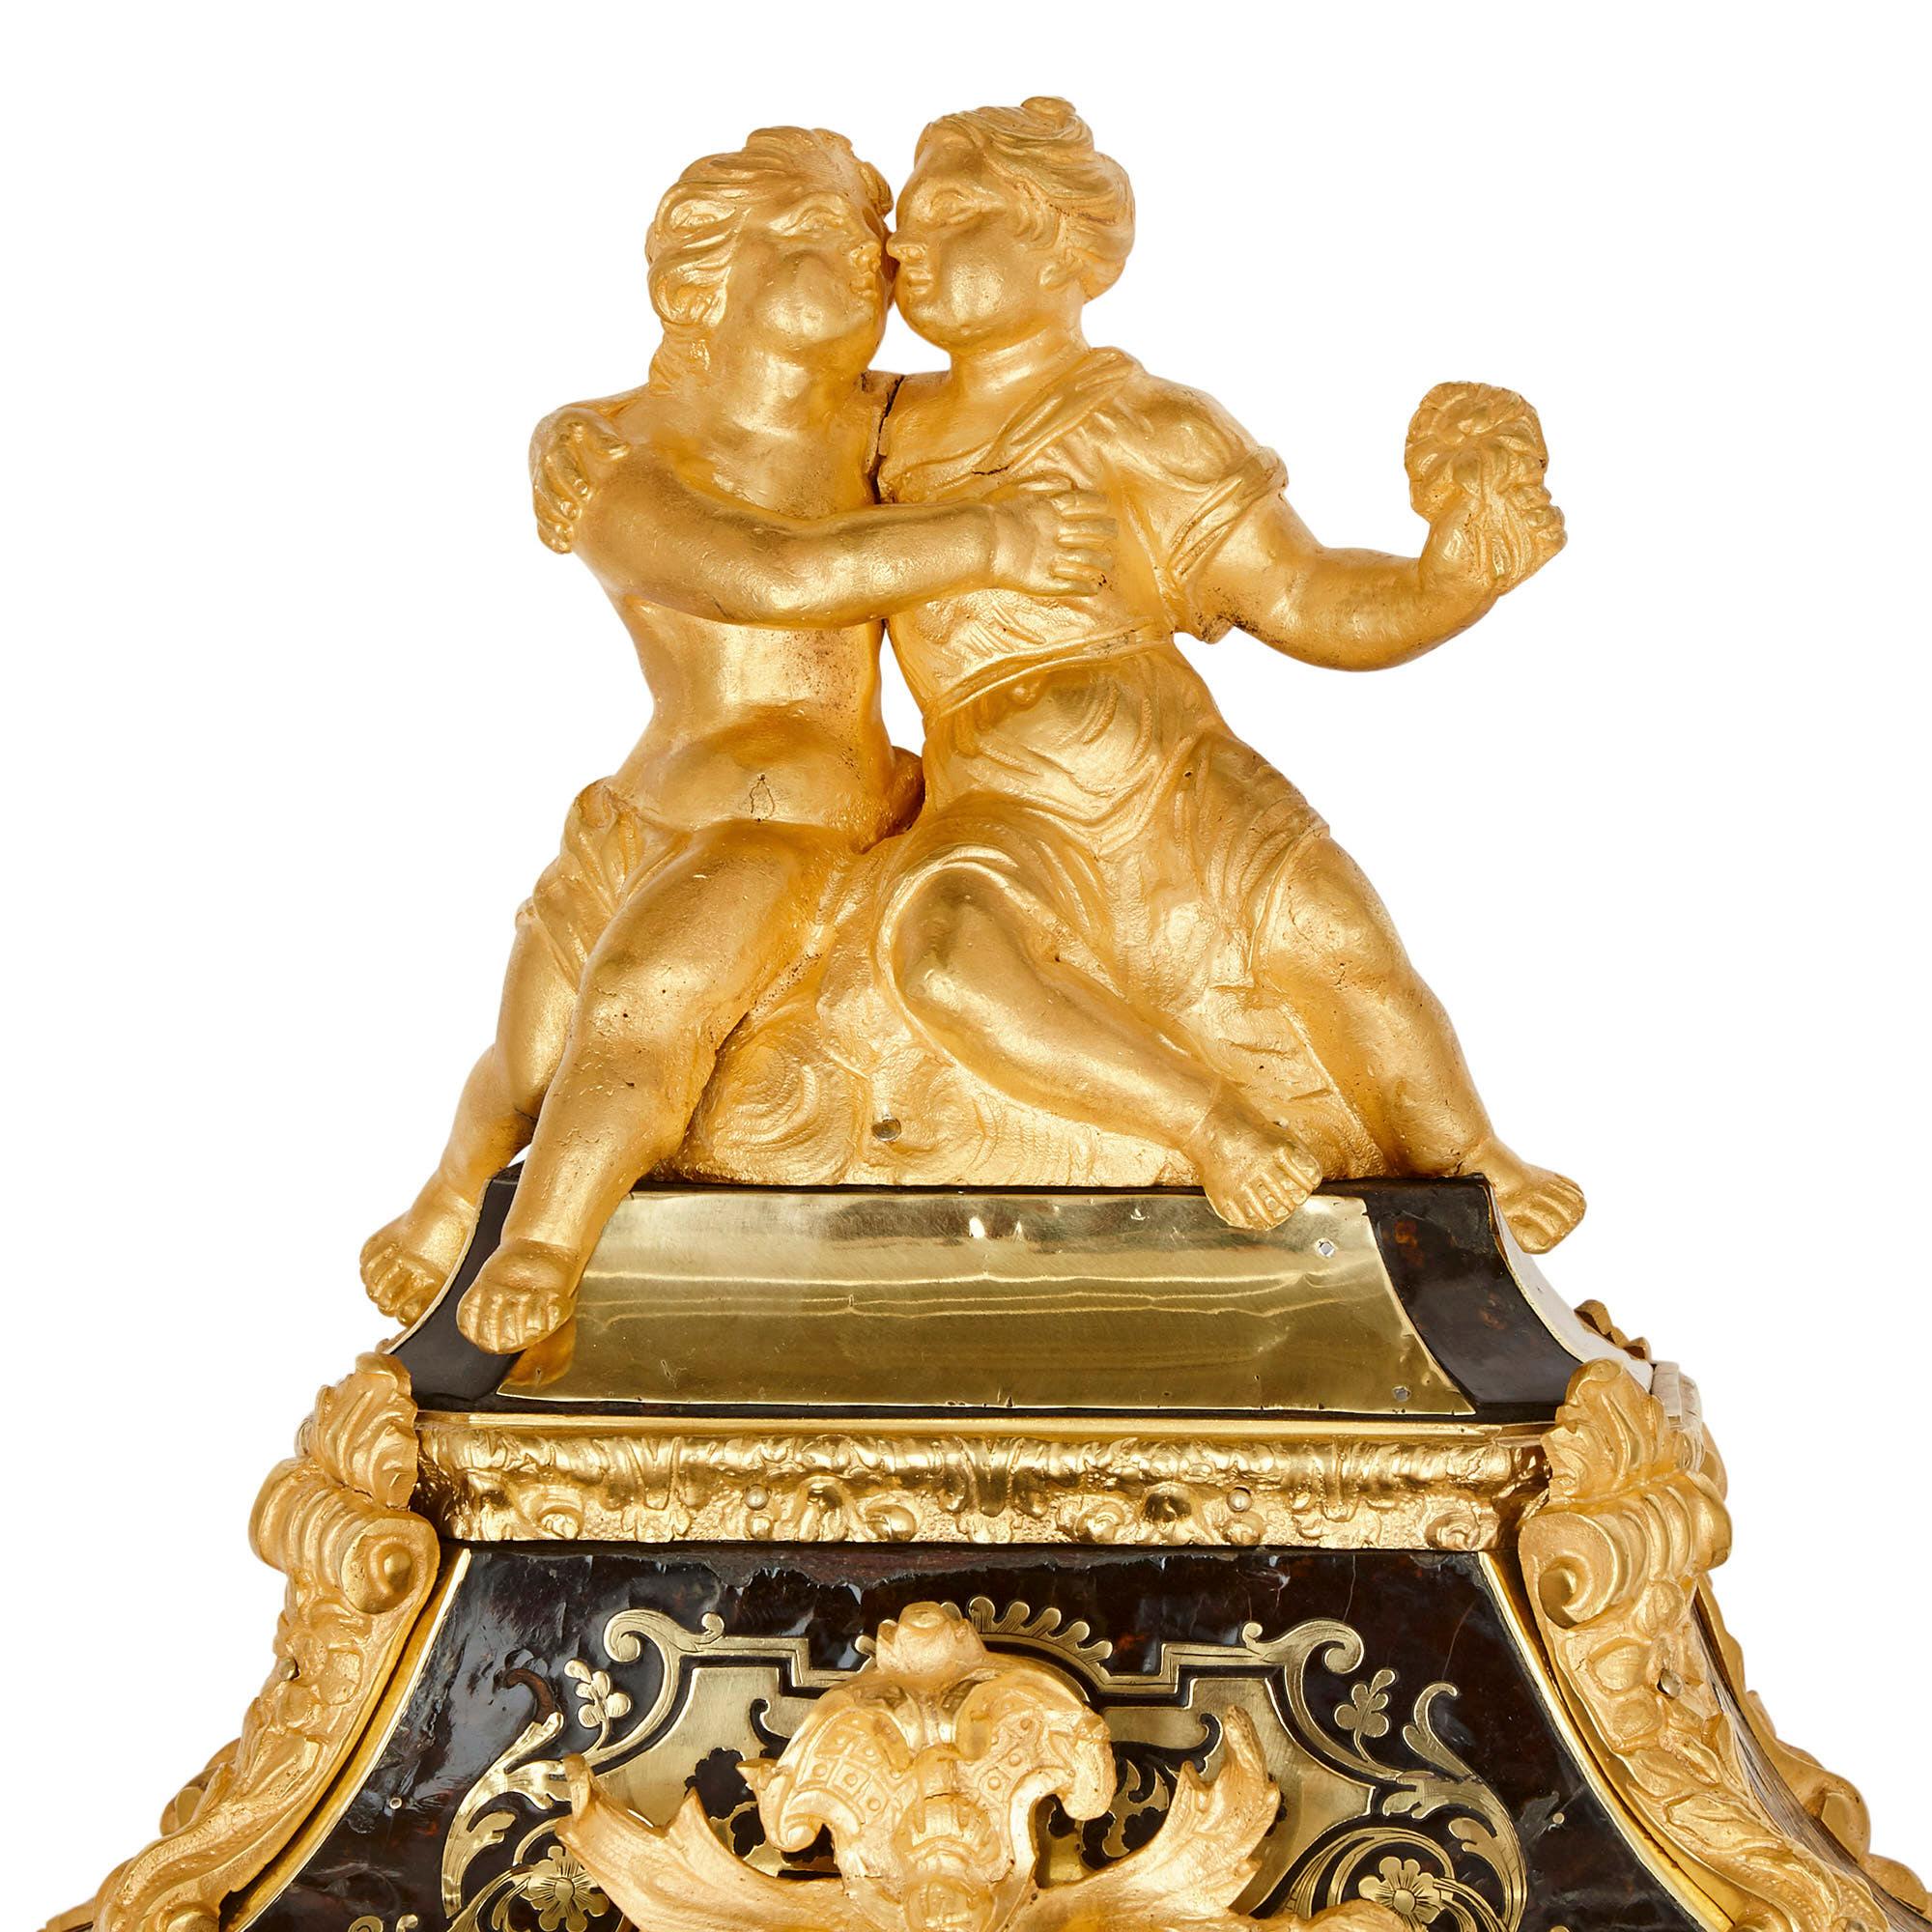 Louis XV Antique 18th Century Boulle Bracket Clock by Brezagez and Marchand For Sale